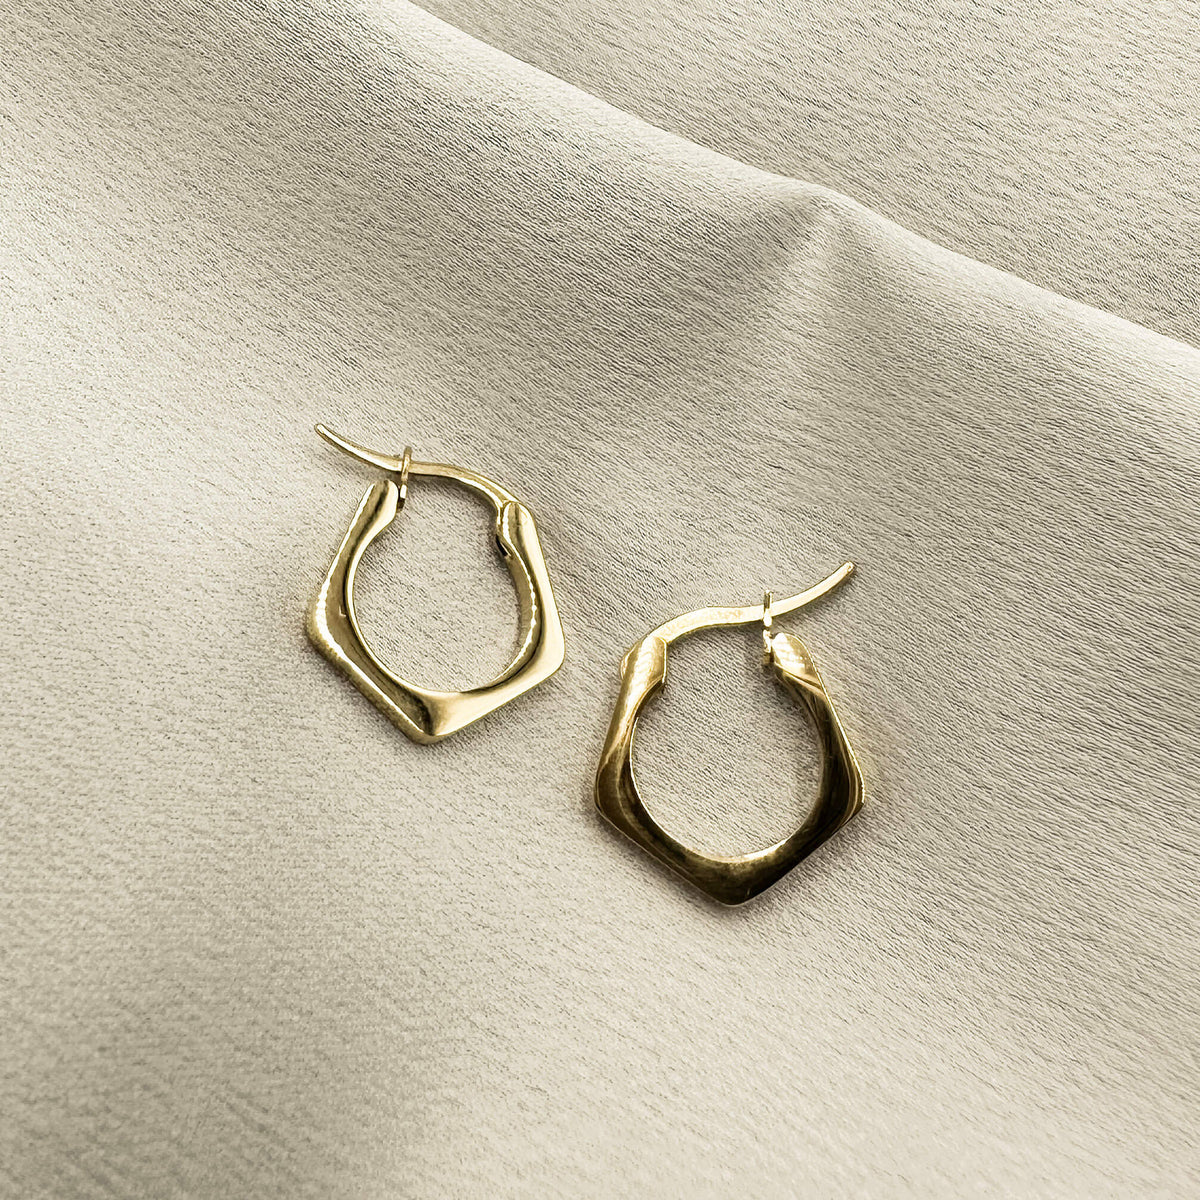 best selling earrings from Mettle & Bloom. These urbane hoop earrings have an angled design that is both contemporary and timeless. They have a hinge clasp and they are lightweight. 